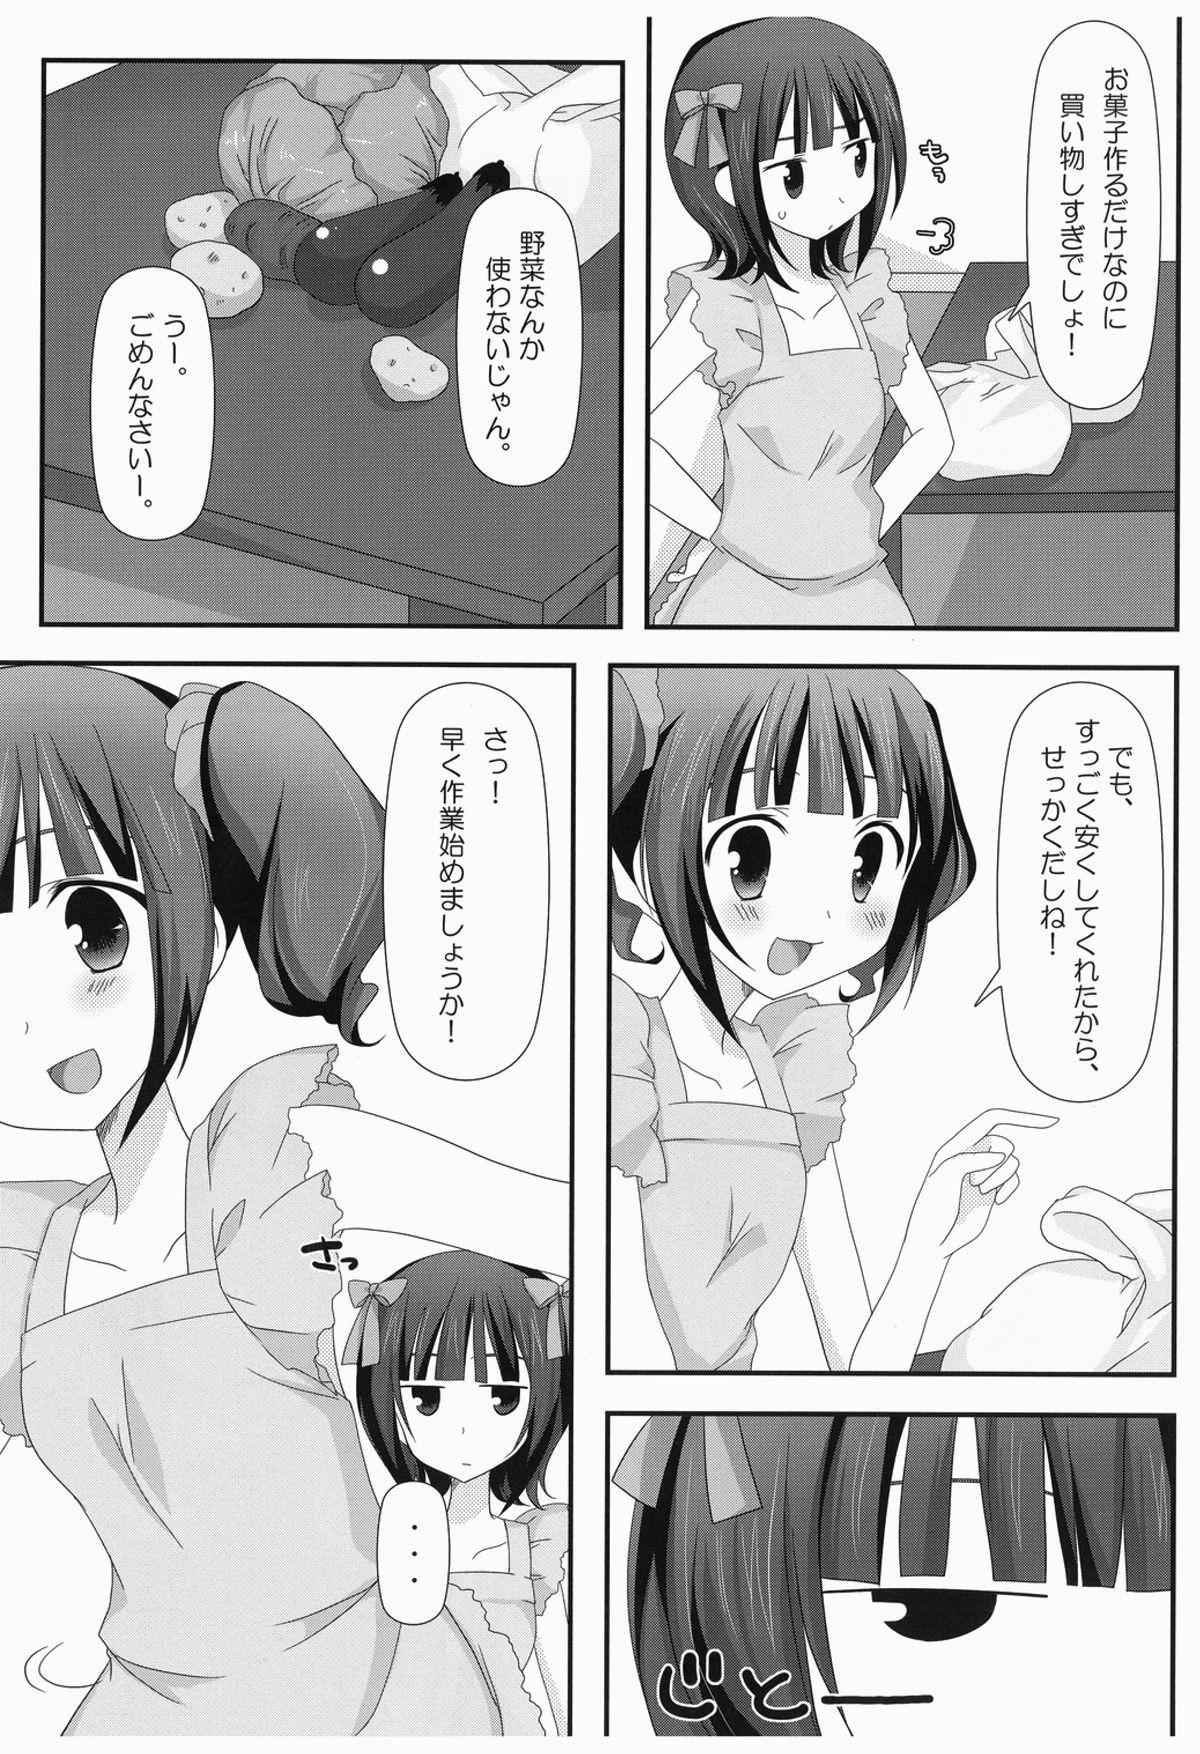 Riding Sparkling Sweet! - The idolmaster Asslicking - Page 4